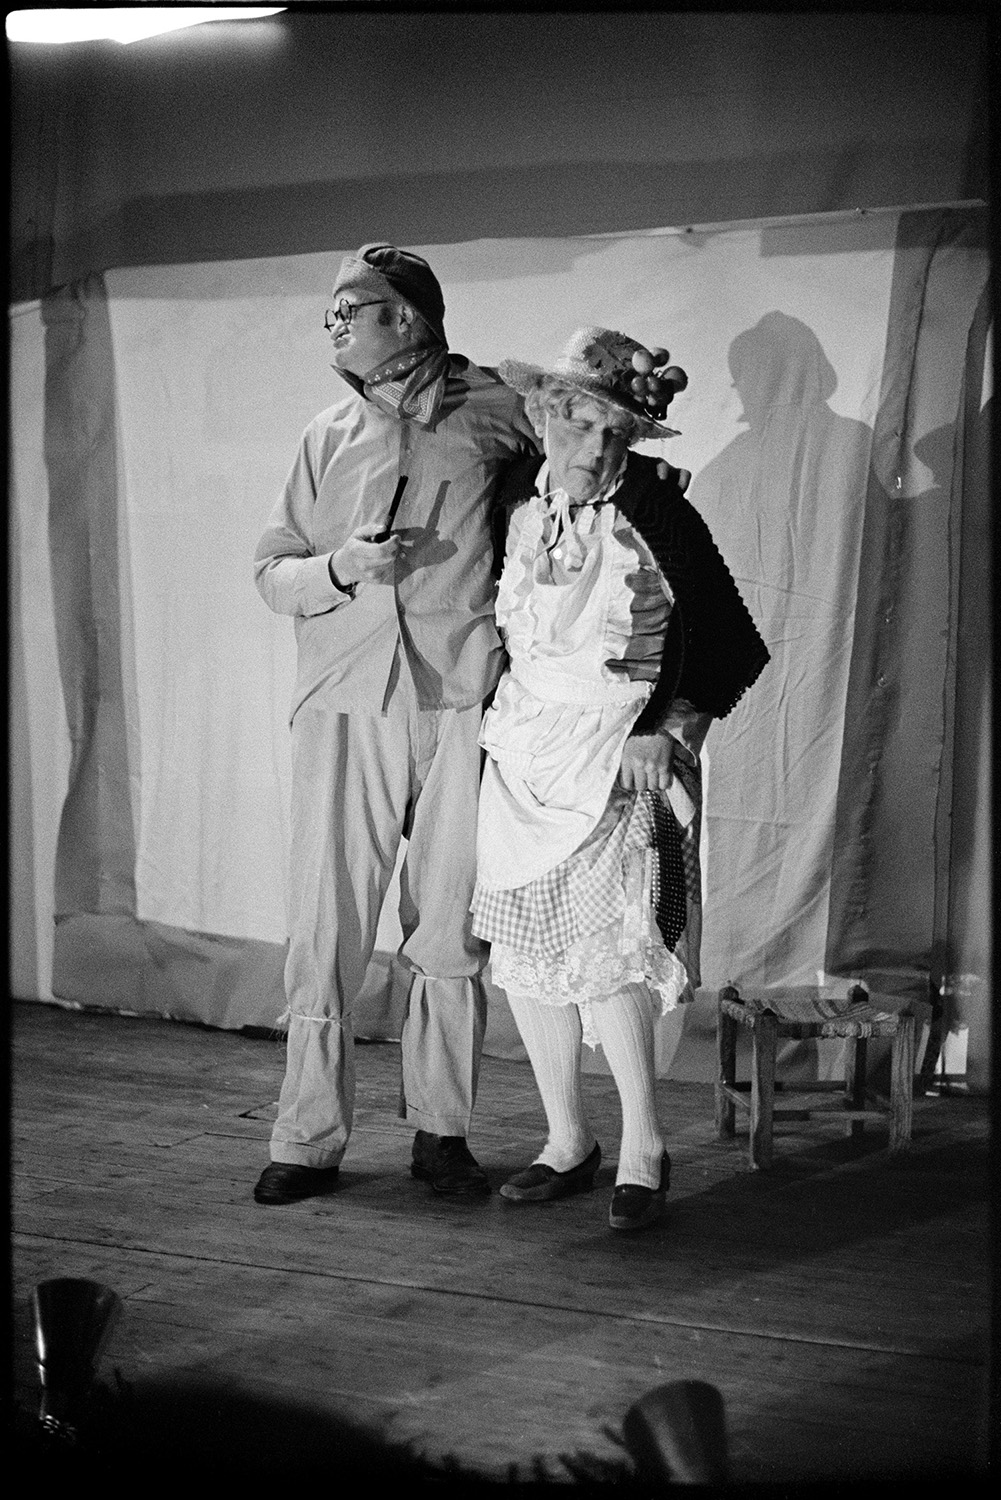 Christmas entertainment in village hall, singing and dance, short plays.<br />
[George Keen, on the left, and John Tucker, on the right, in fancy dress on stage at High Bickington village hall. They are performing a short play for Christmas entertainment.]